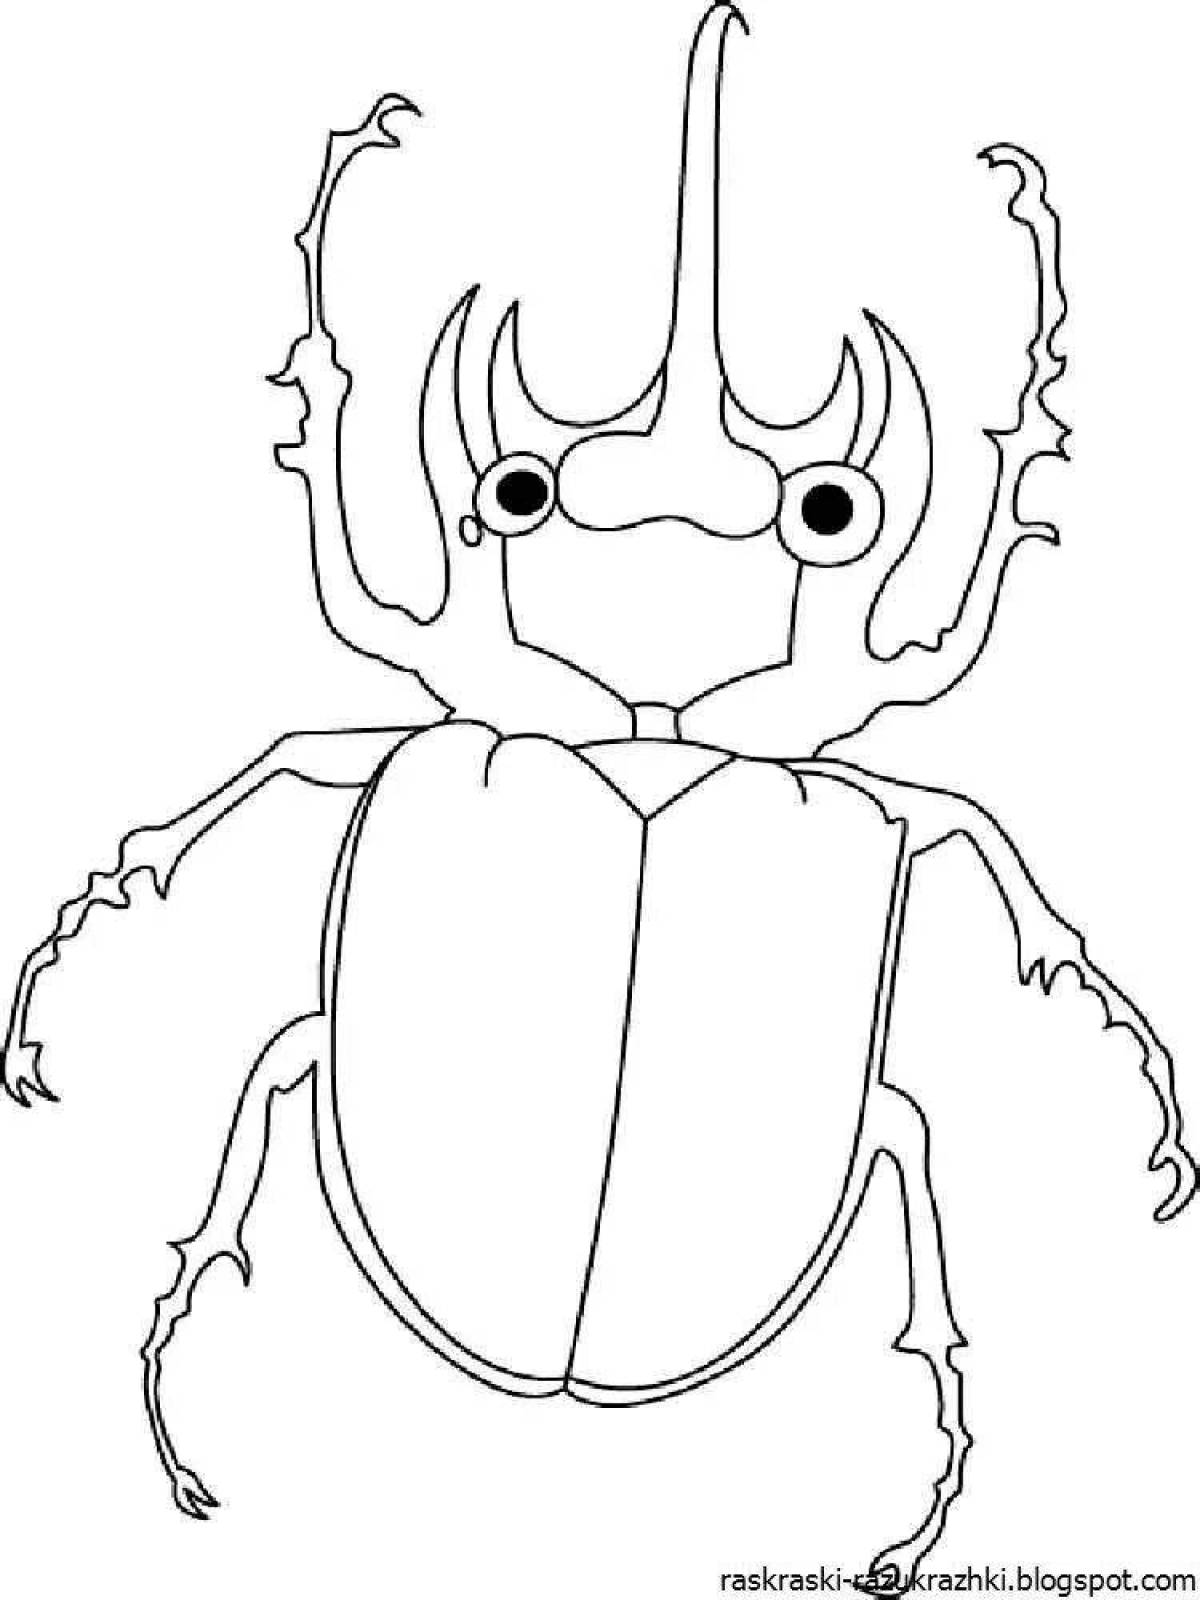 Exquisite beetle coloring book for kids